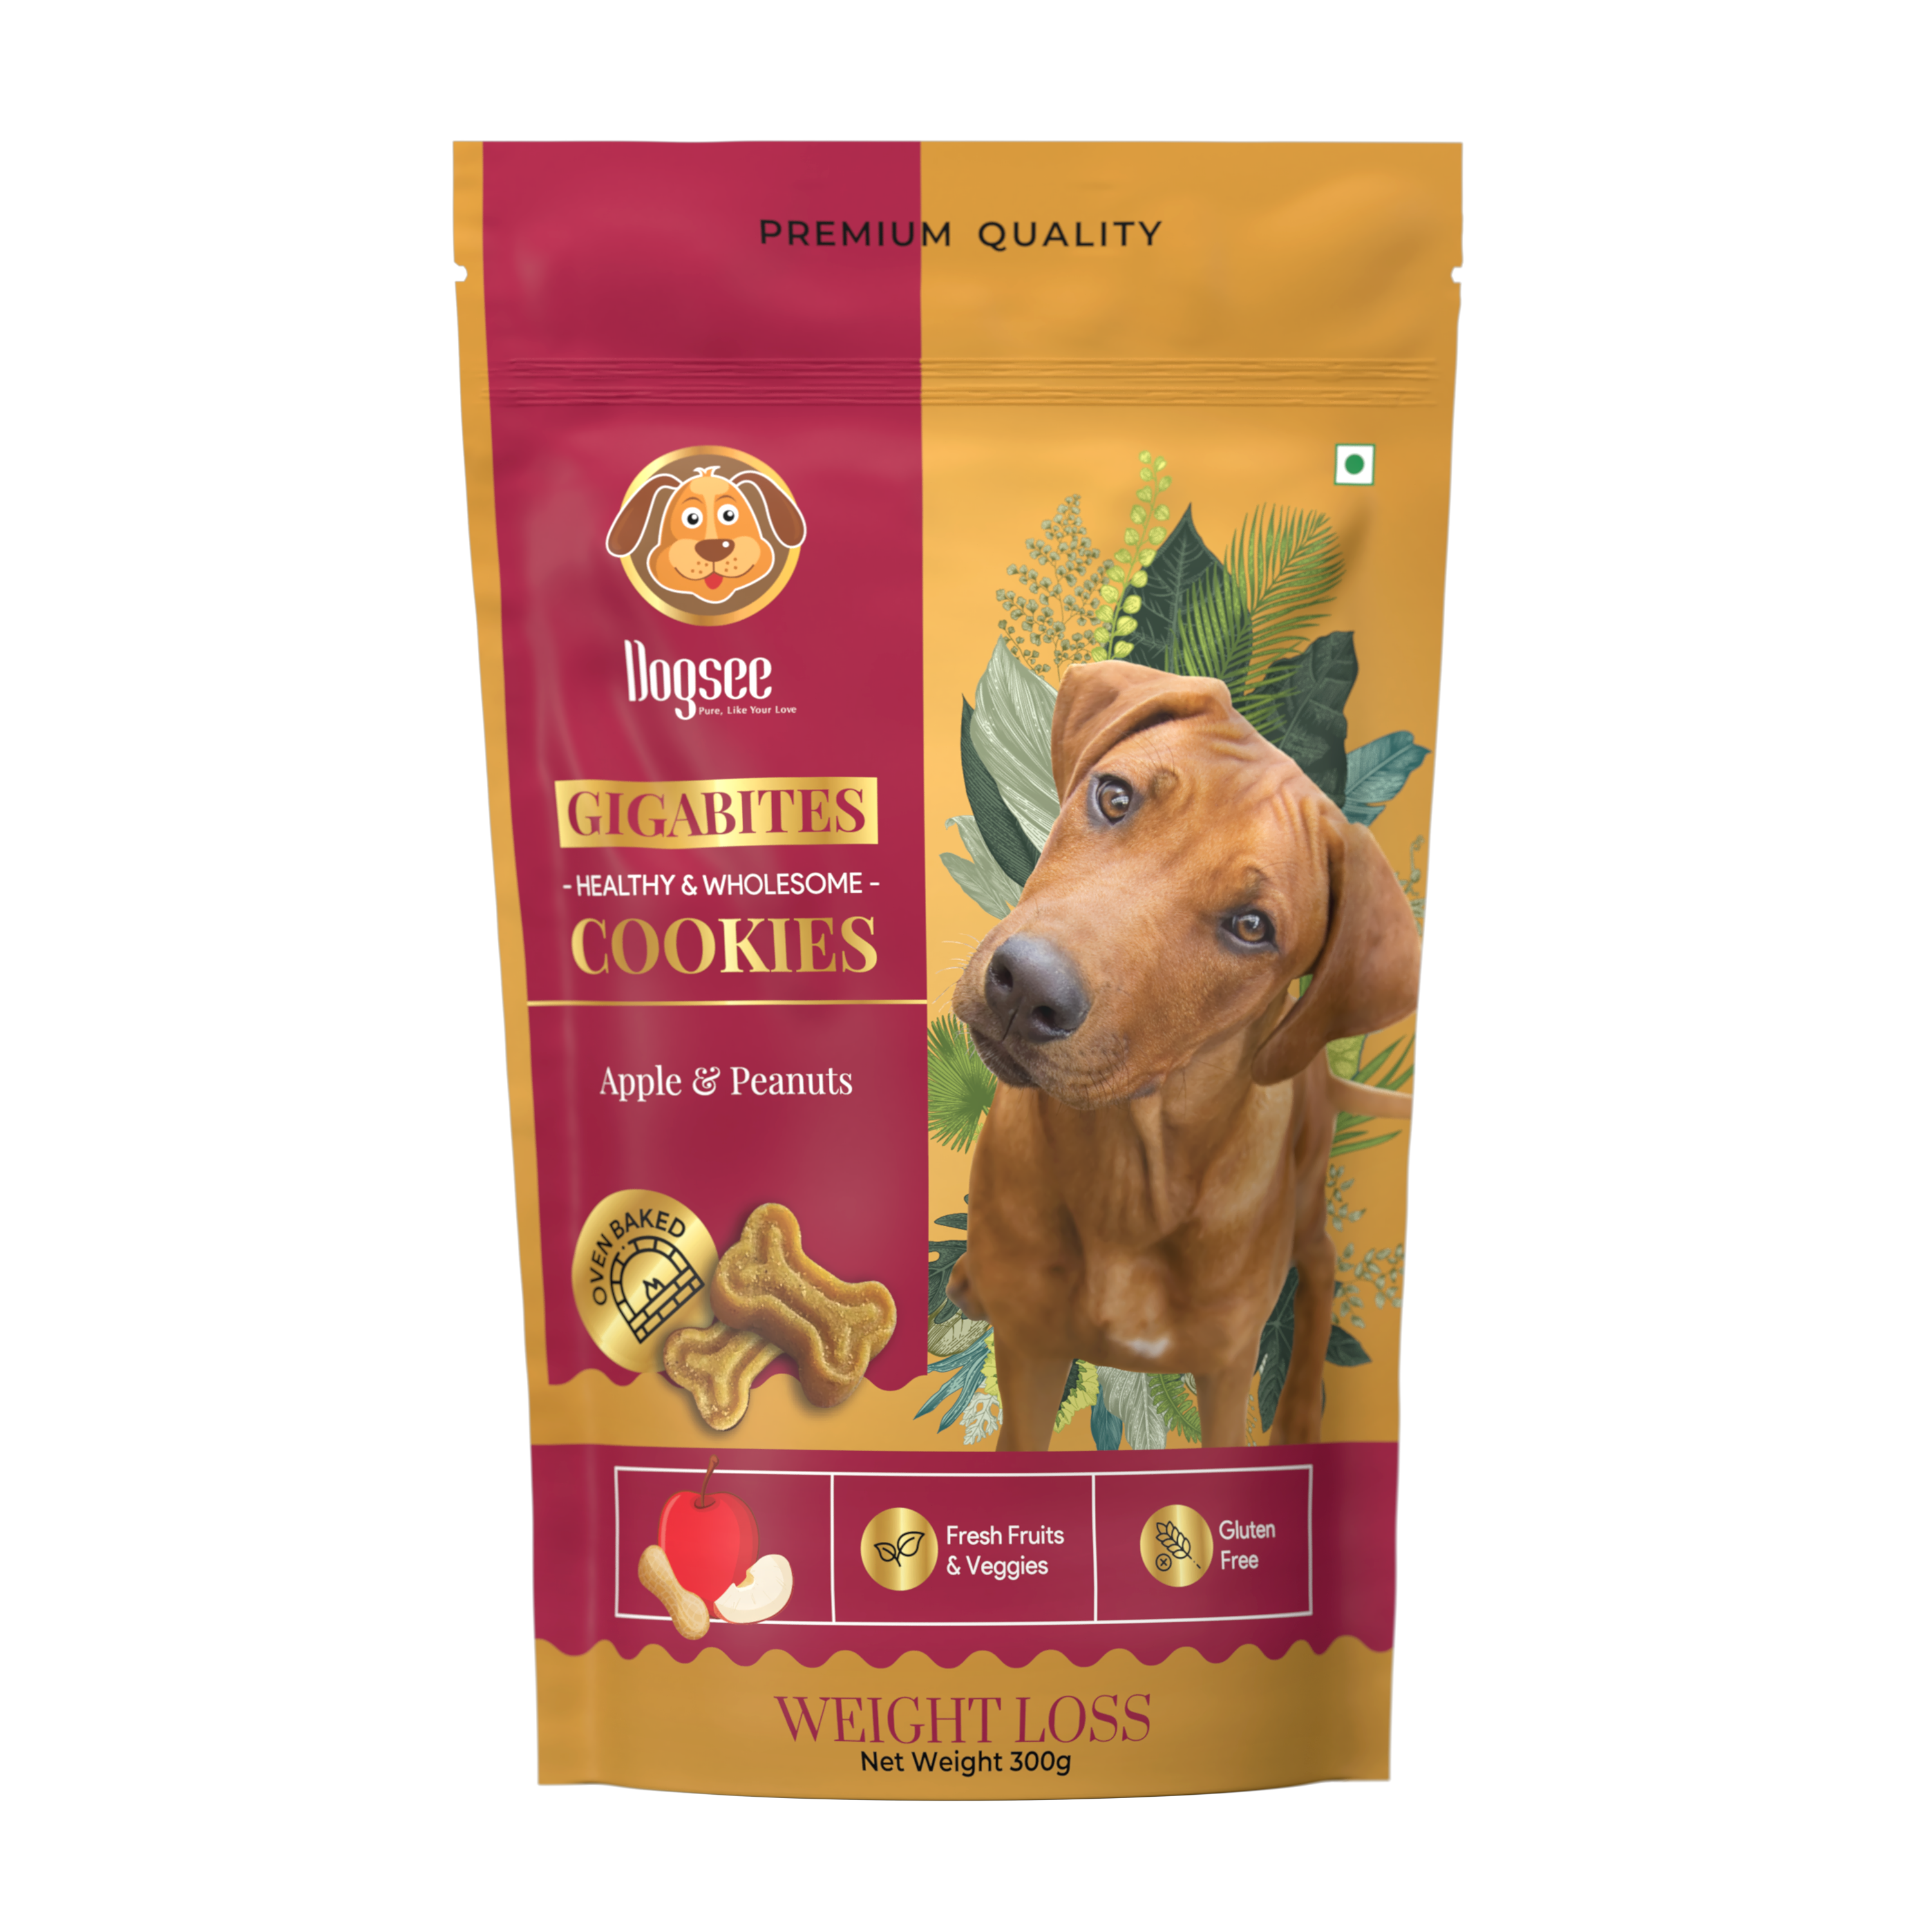 Dogsee Gigabites | Cookies for Dogs | 300gm